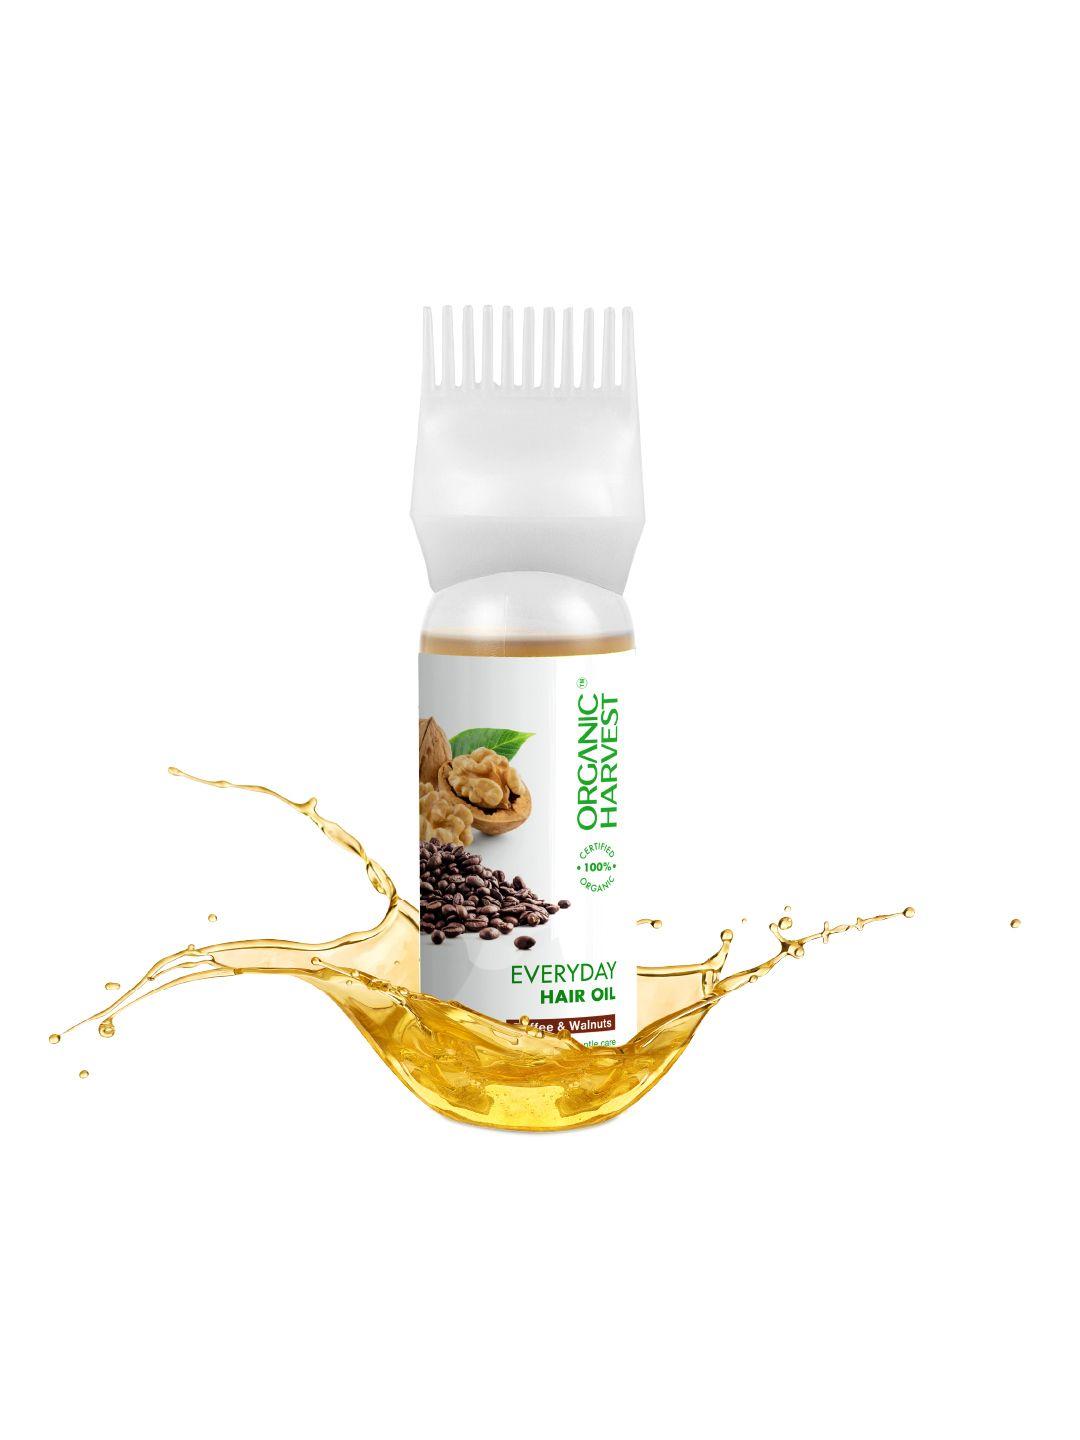 organic harvest everyday hair oil infused with coffee & walnuts extracts